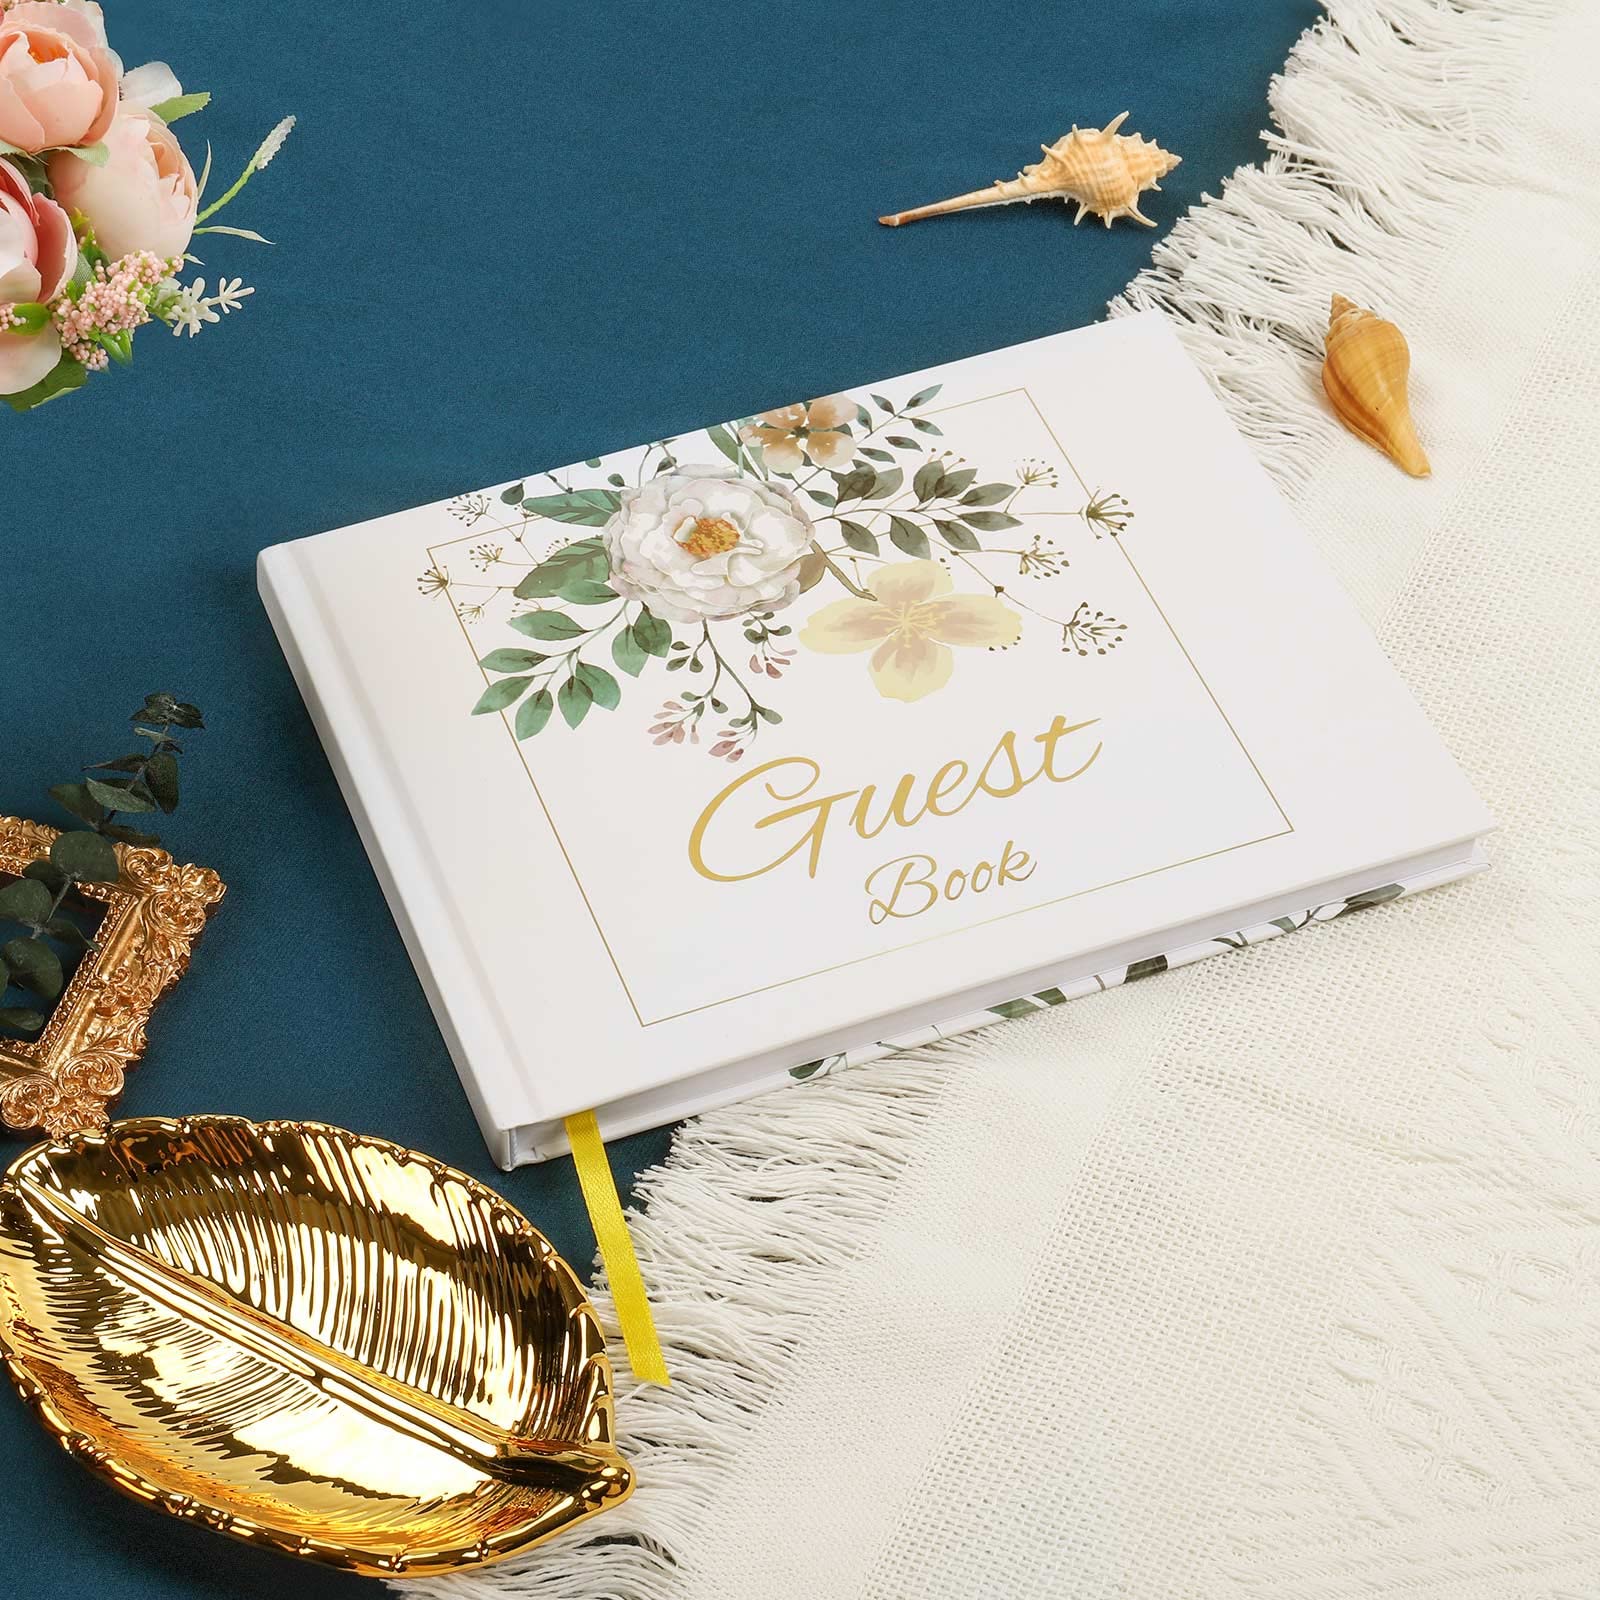 Wedding Guest Book, Guest Sign in Book for Wedding Reception, 120 Pages Hard Cover Guest Book, Beautiful Gold Text with Floral Design Wedding Registry Guestbook for Signing Book 9 x 7 Inch